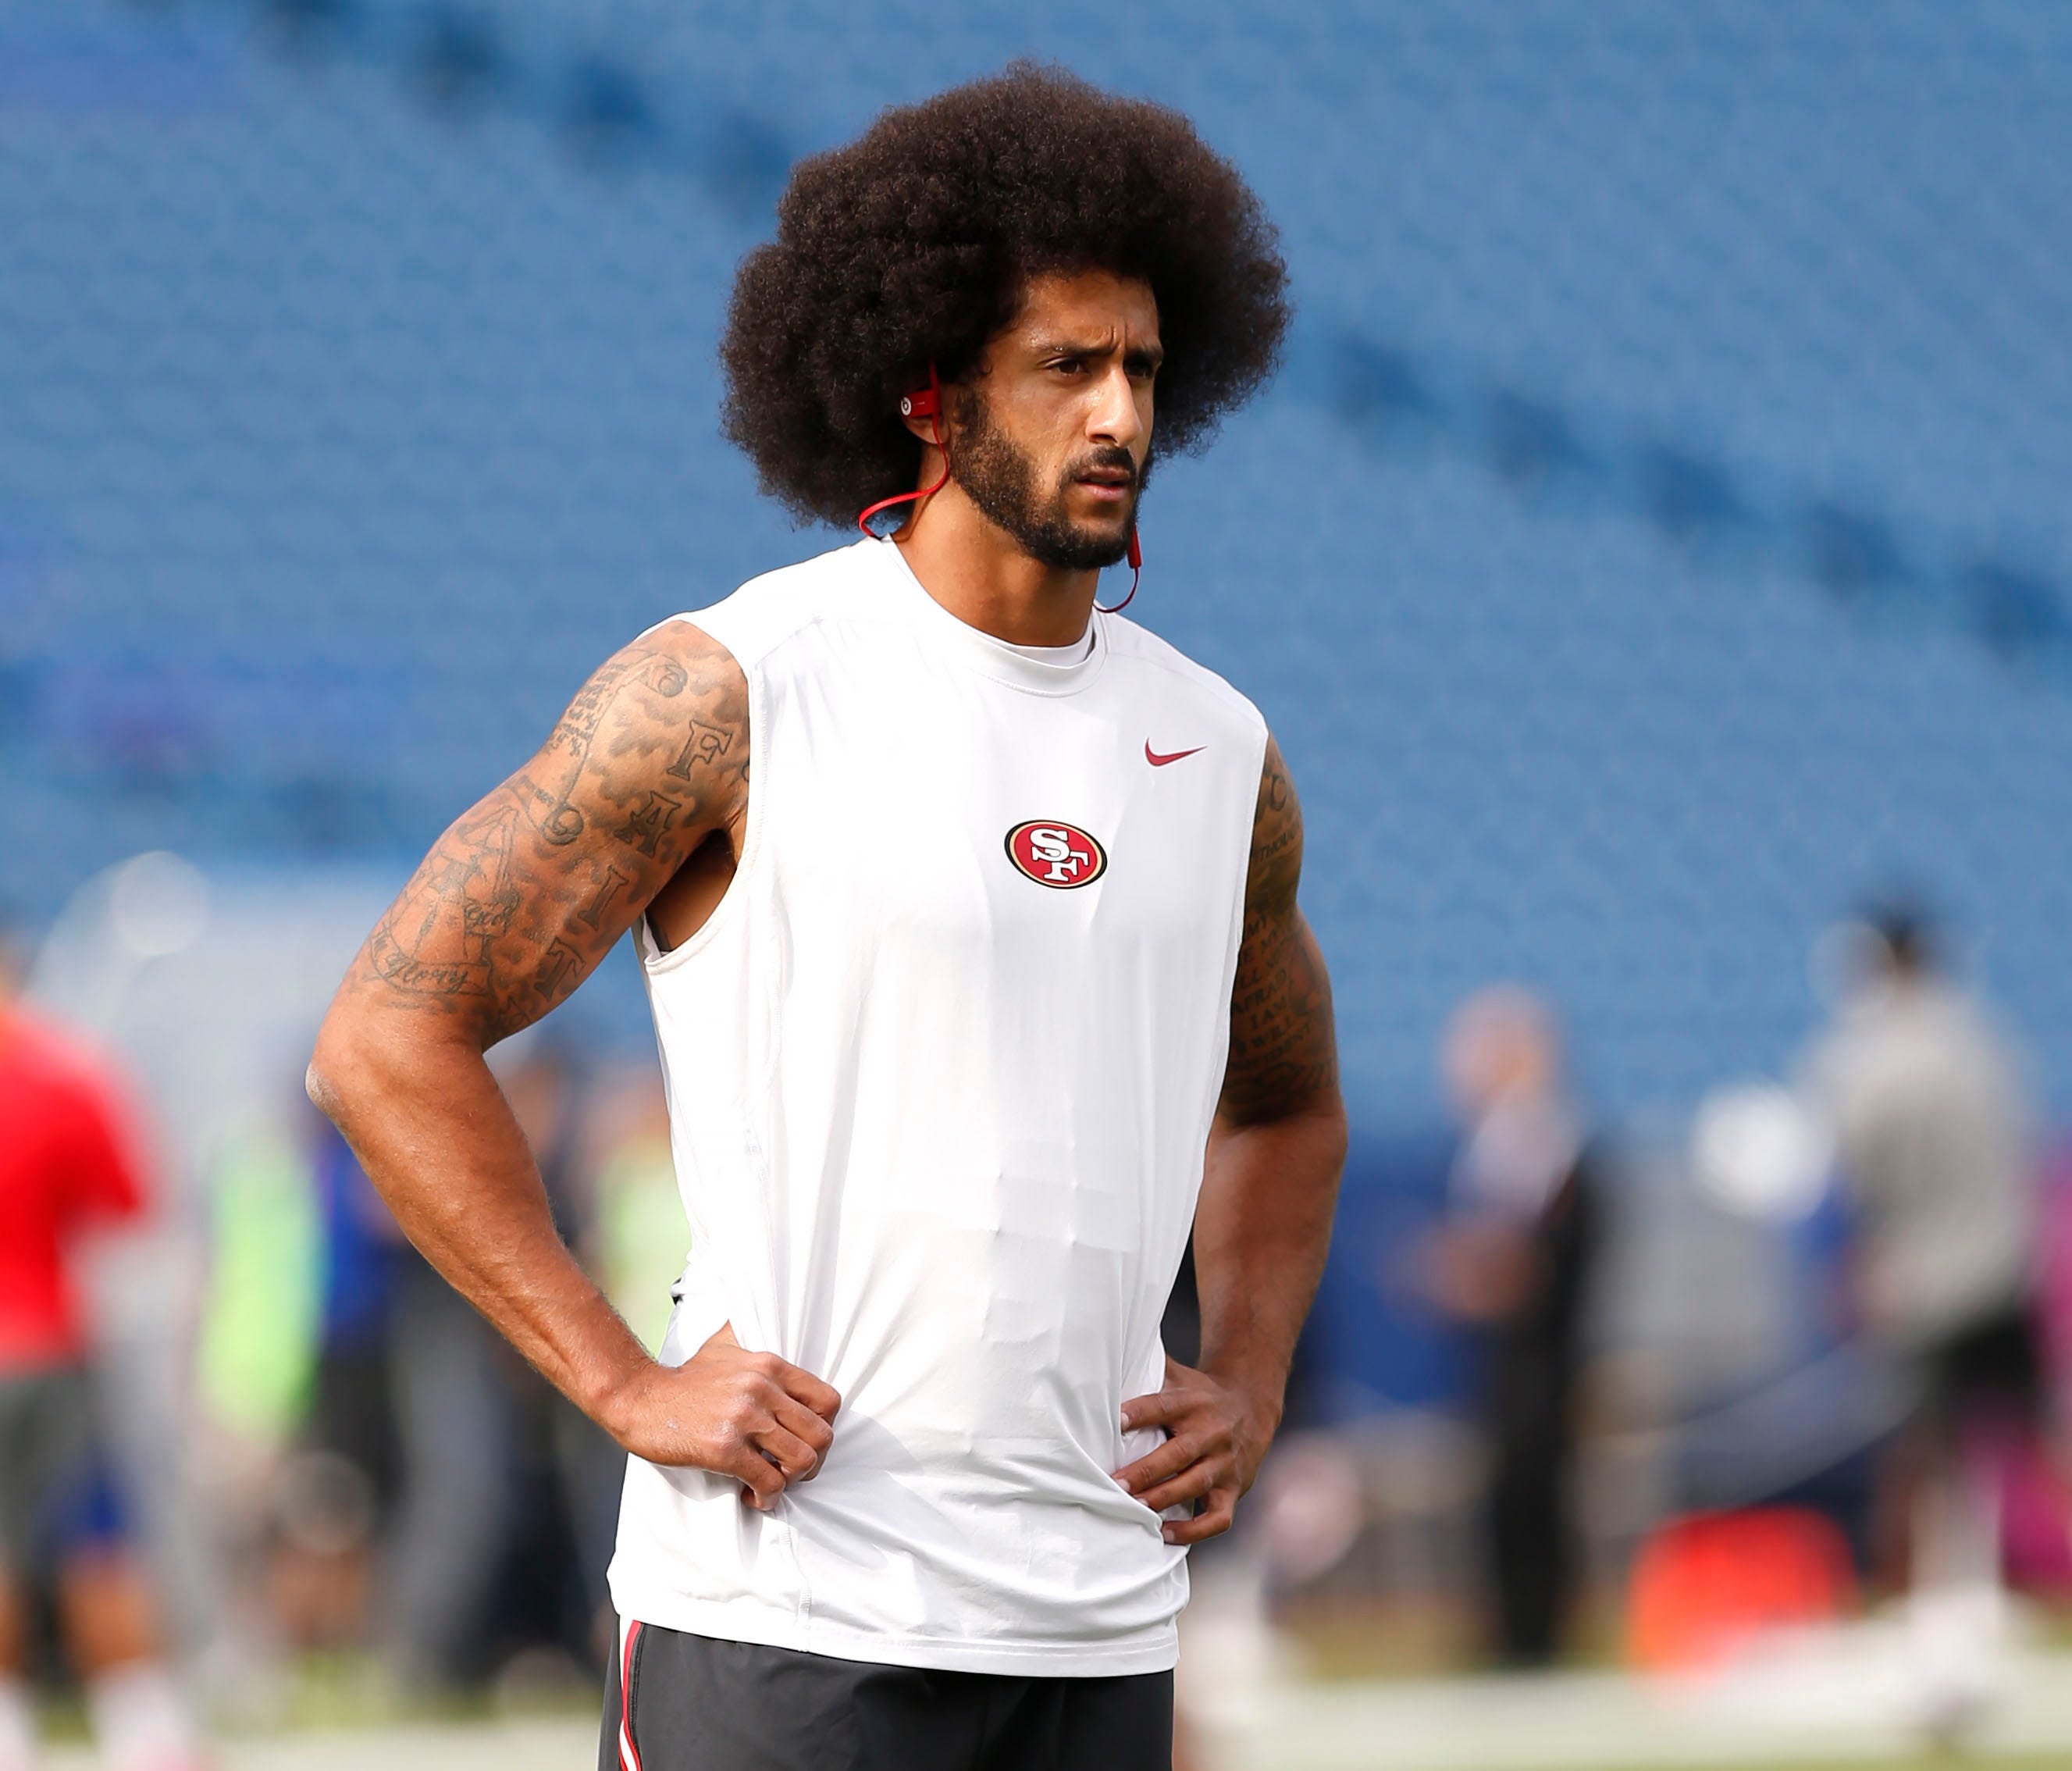 San Francisco 49ers quarterback Colin Kaepernick (7) on the field before the game against the Buffalo Bills at New Era Field.